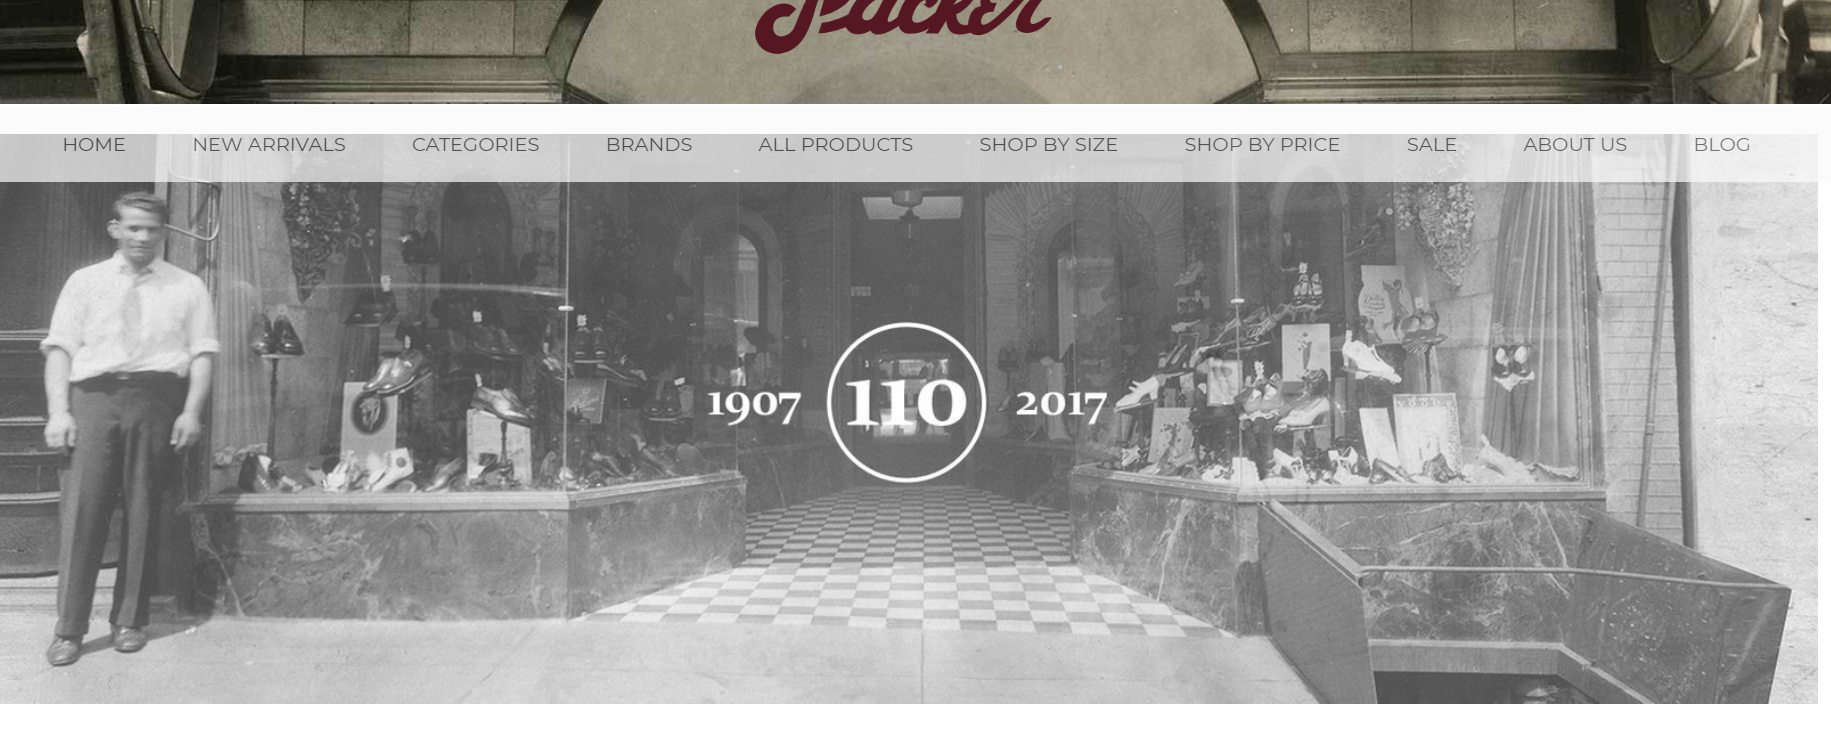 Packer shoes homepage shopify customer service